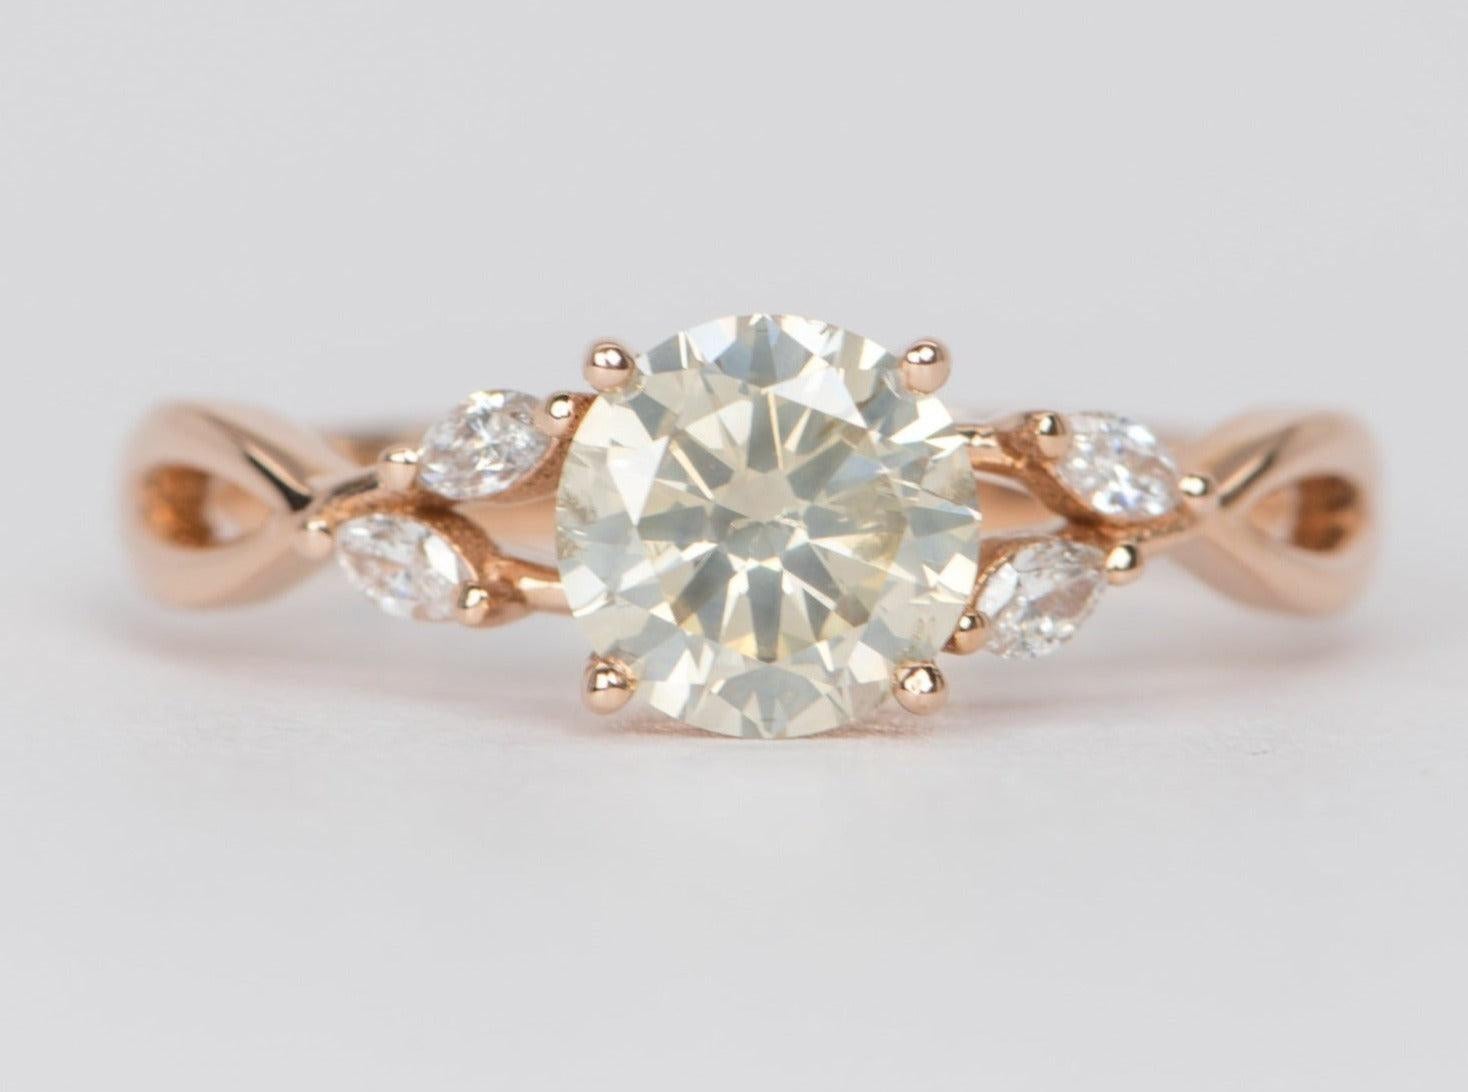 ♥ A solid 14K rose gold ring set with a champagne colored salt and pepper diamond set in the center of a nature-inspired band that is adorned with four leaf-shaped white diamonds

♥ US Size 7 (free resizing)
♥ Band width: 2mm (widest point)
♥